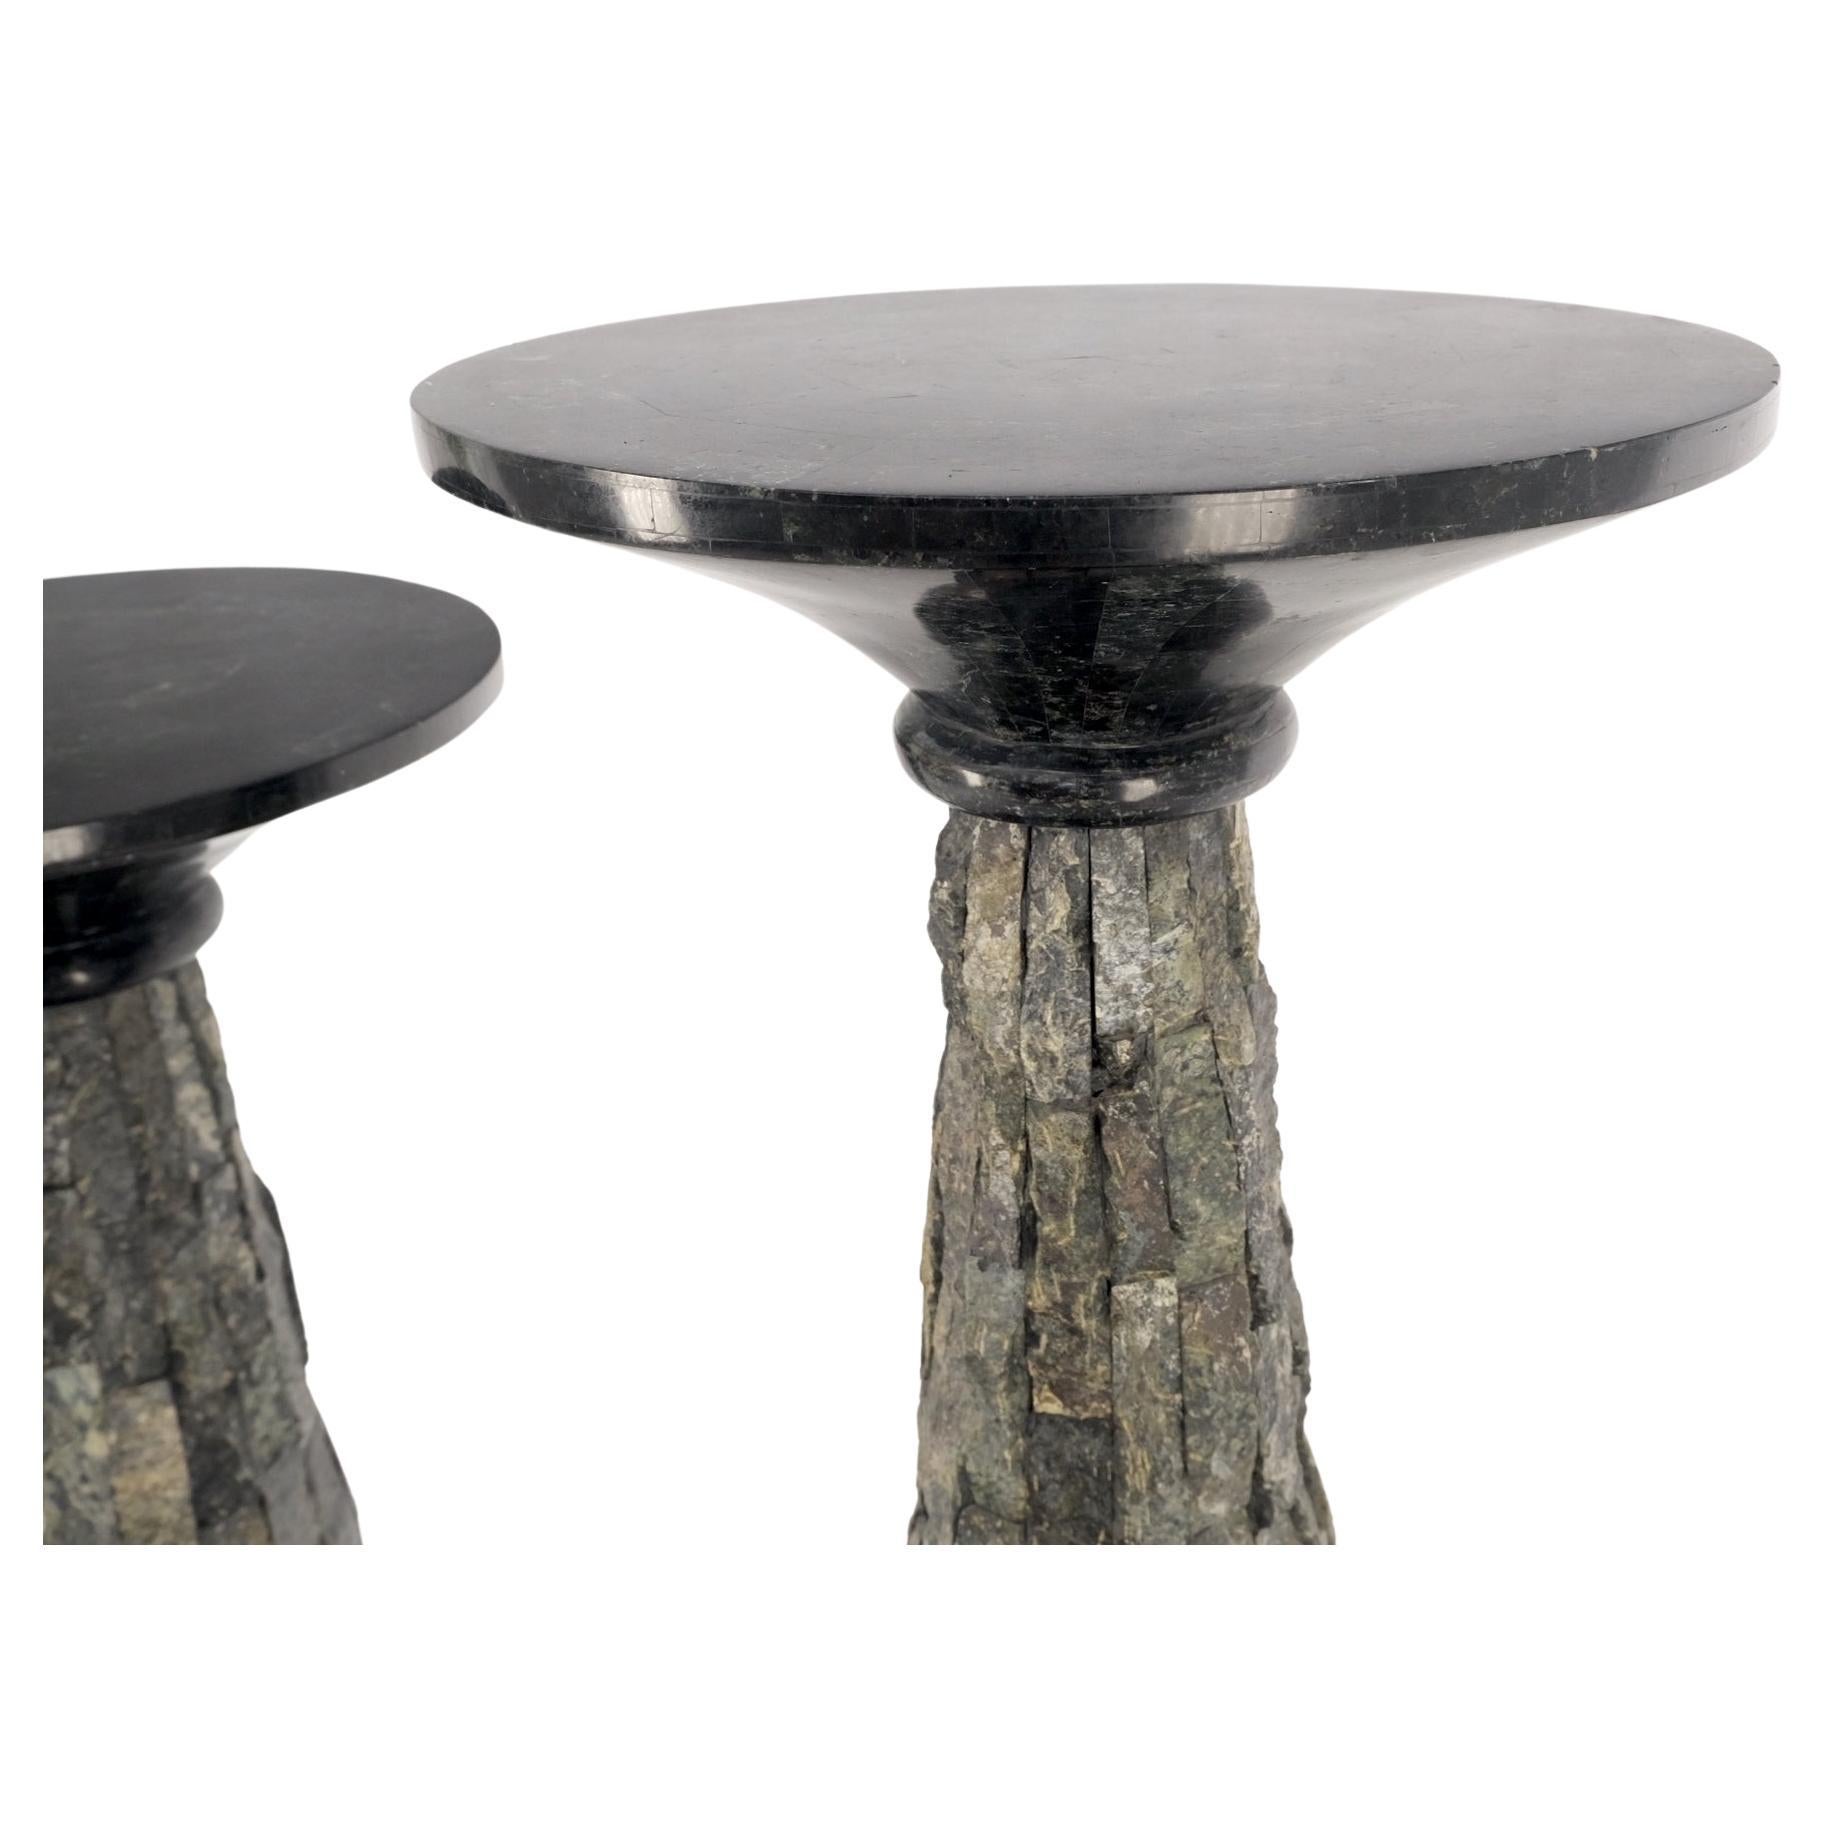 Carved Pair of Polished & Rough Stone Tiles Cone Shape Non Matching Pair of Pedestals  For Sale